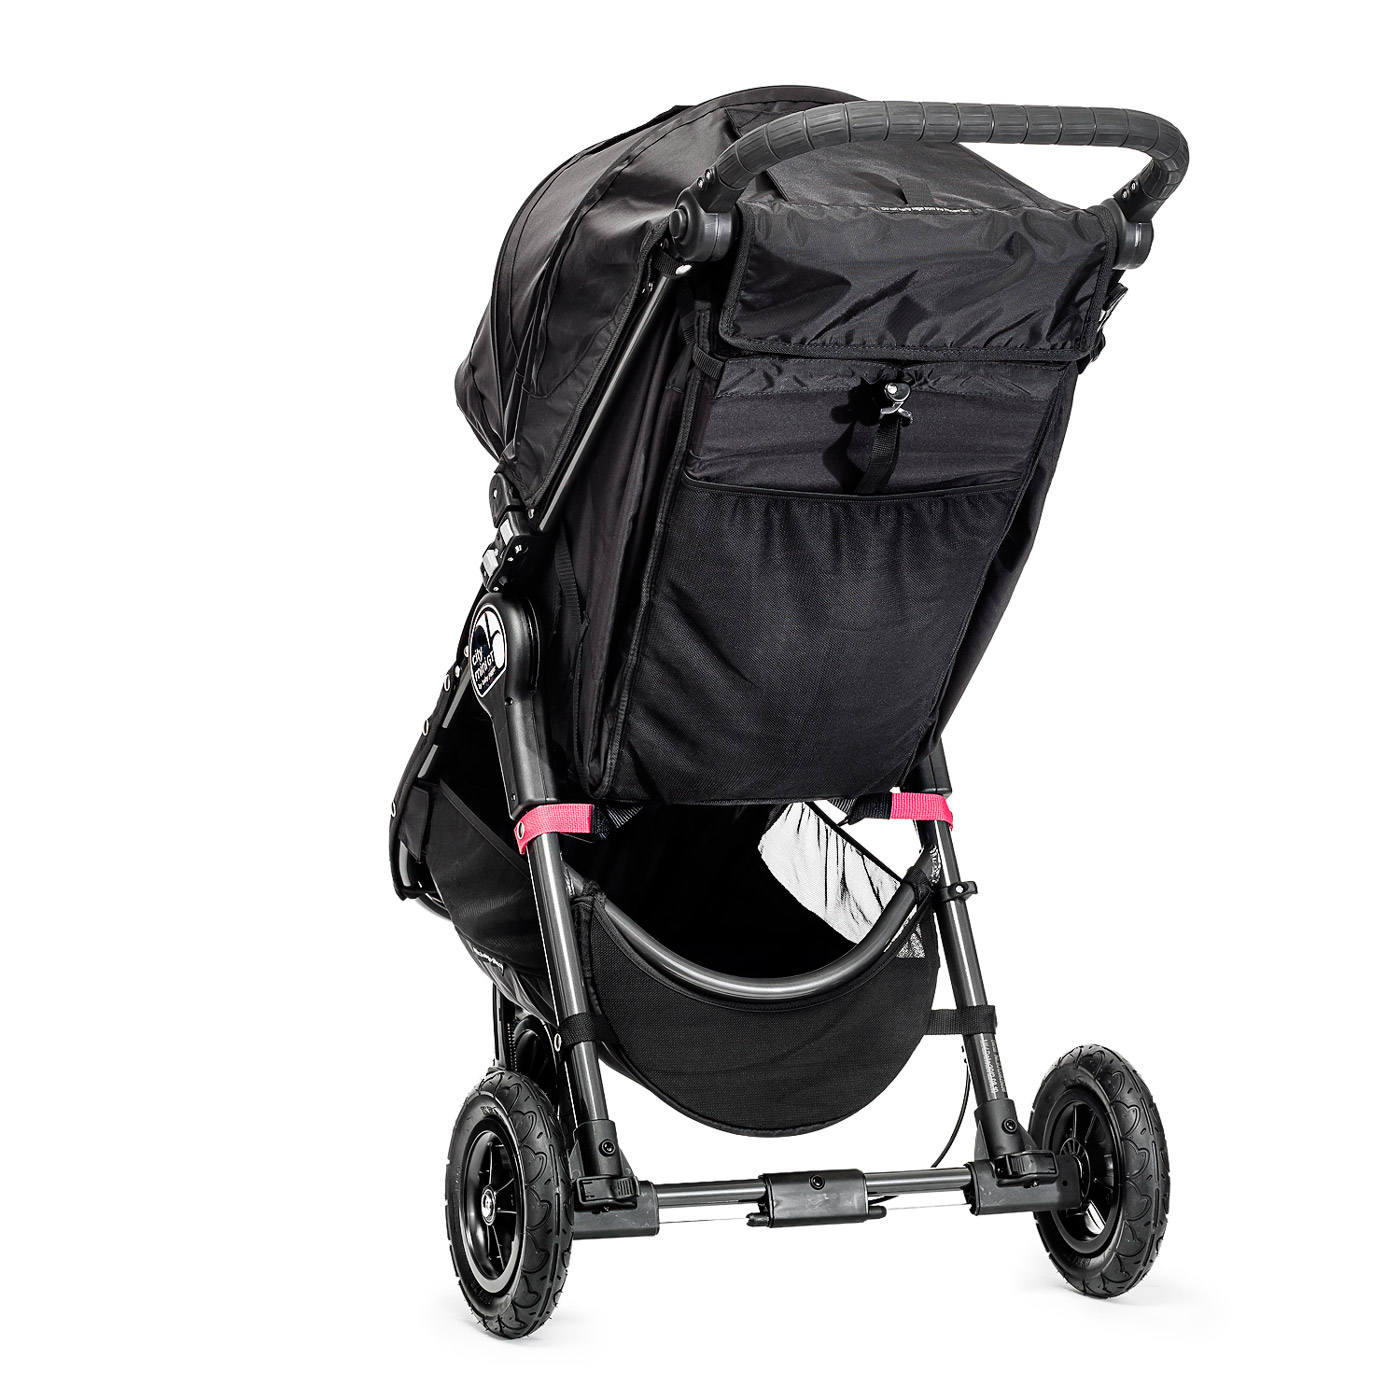 10 Reasons The City Mini Is The Perfect Stroller - Rustic ...